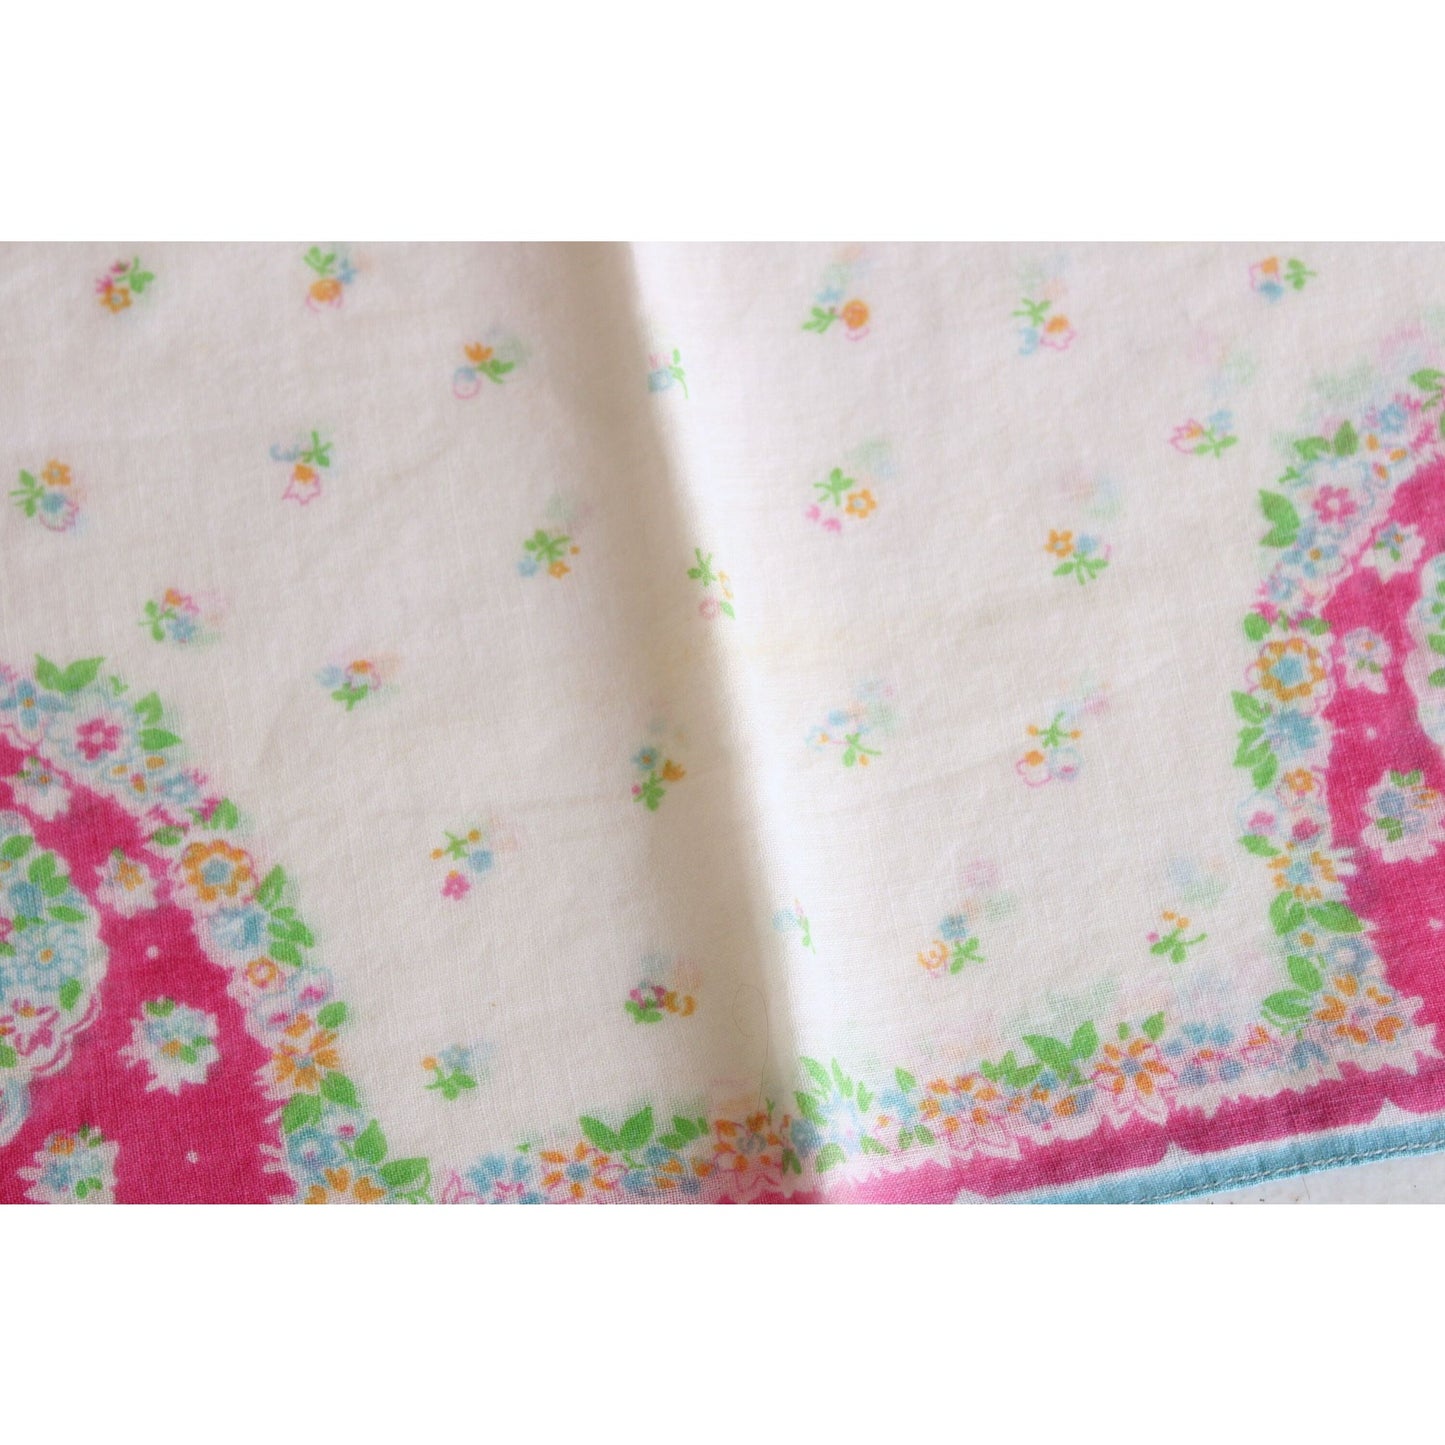 Vintage 1950s Pink Ribbons and Flowers Hanky